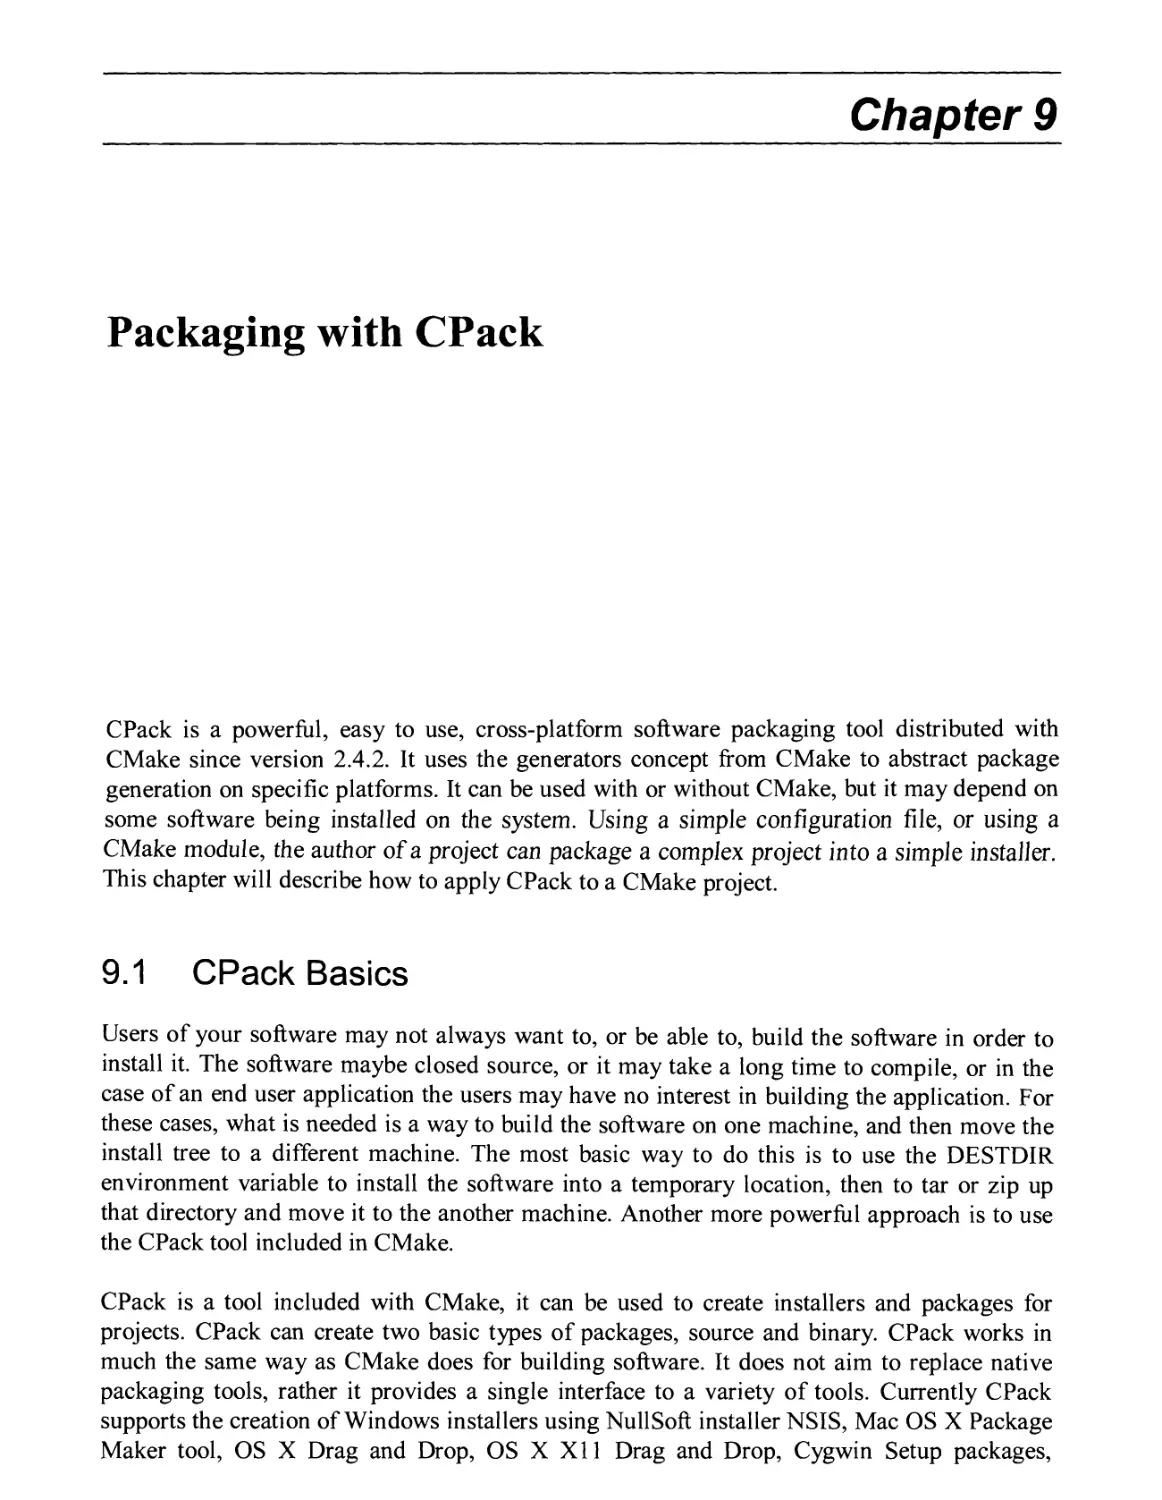 9. PACKAGING WITH CPACK